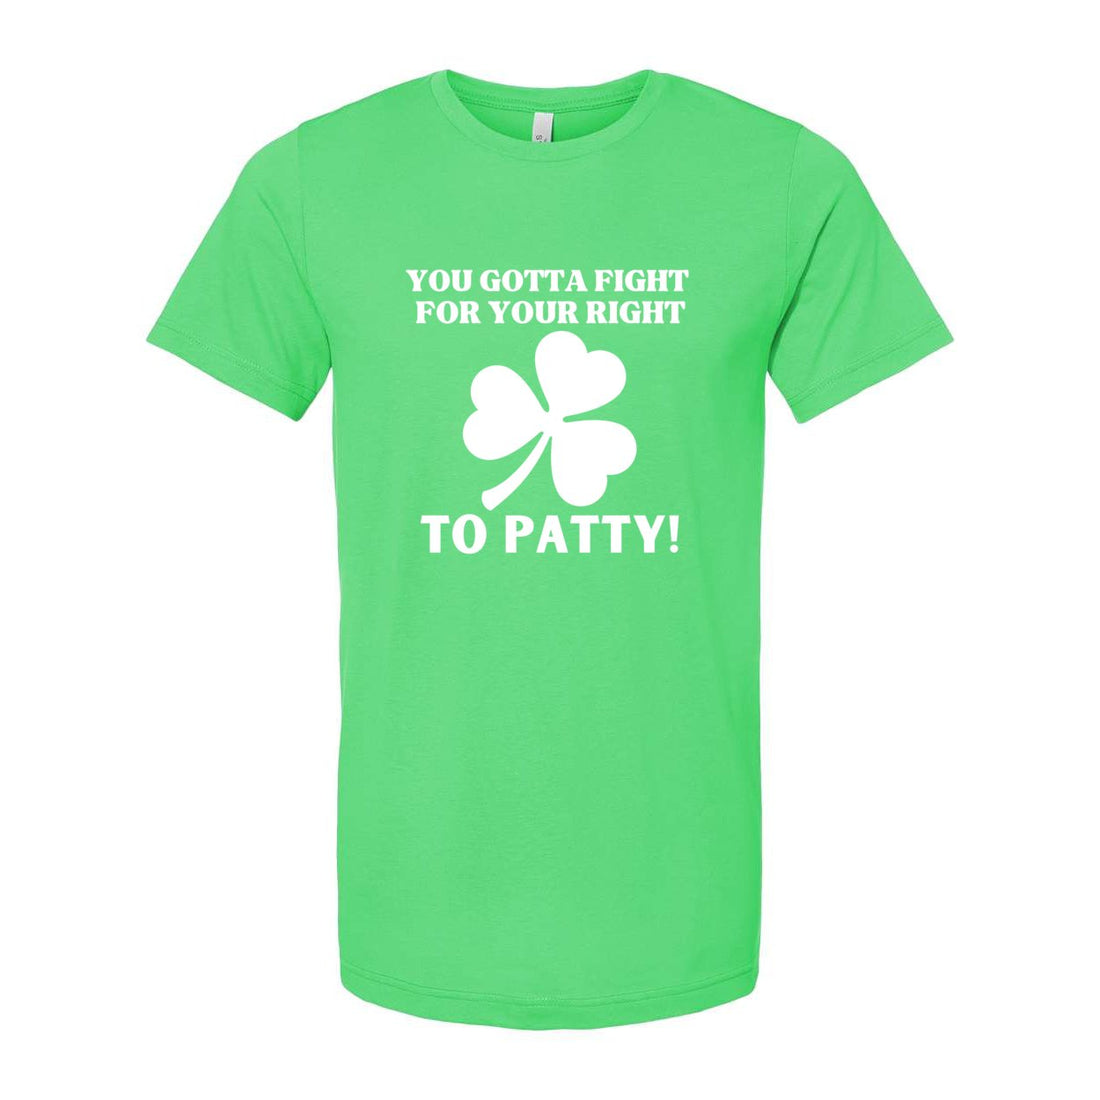 Right To Patty Short Sleeve Jersey Tee - T-Shirts - Positively Sassy - Right To Patty Short Sleeve Jersey Tee